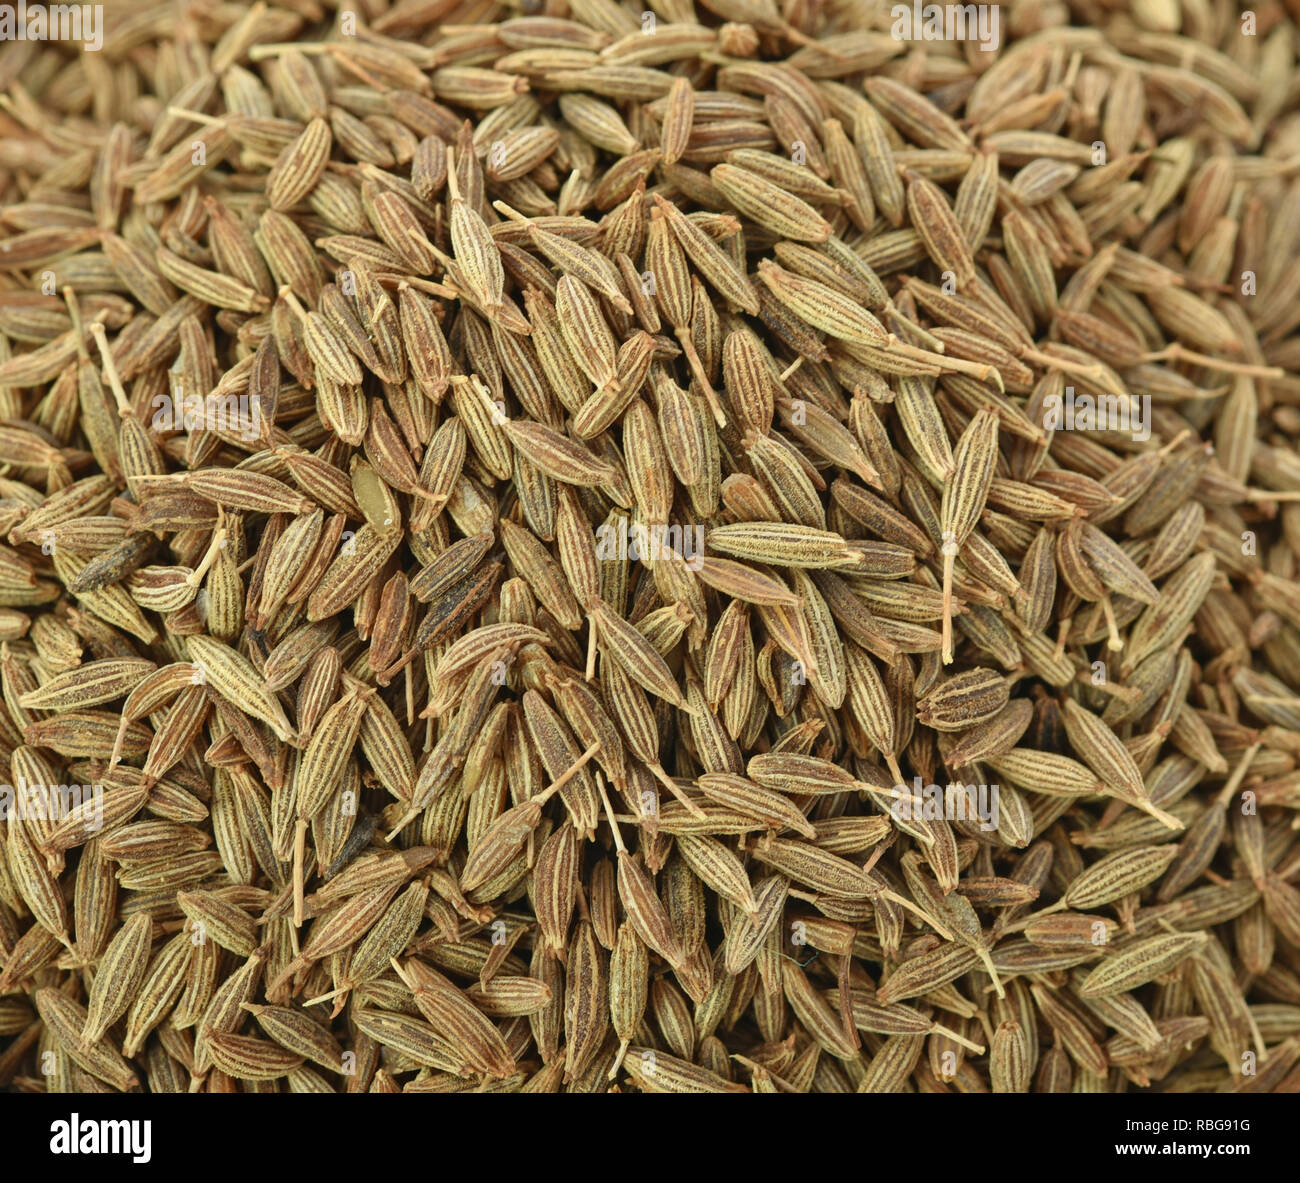 Caraway seeds full frame image background Stock Photo